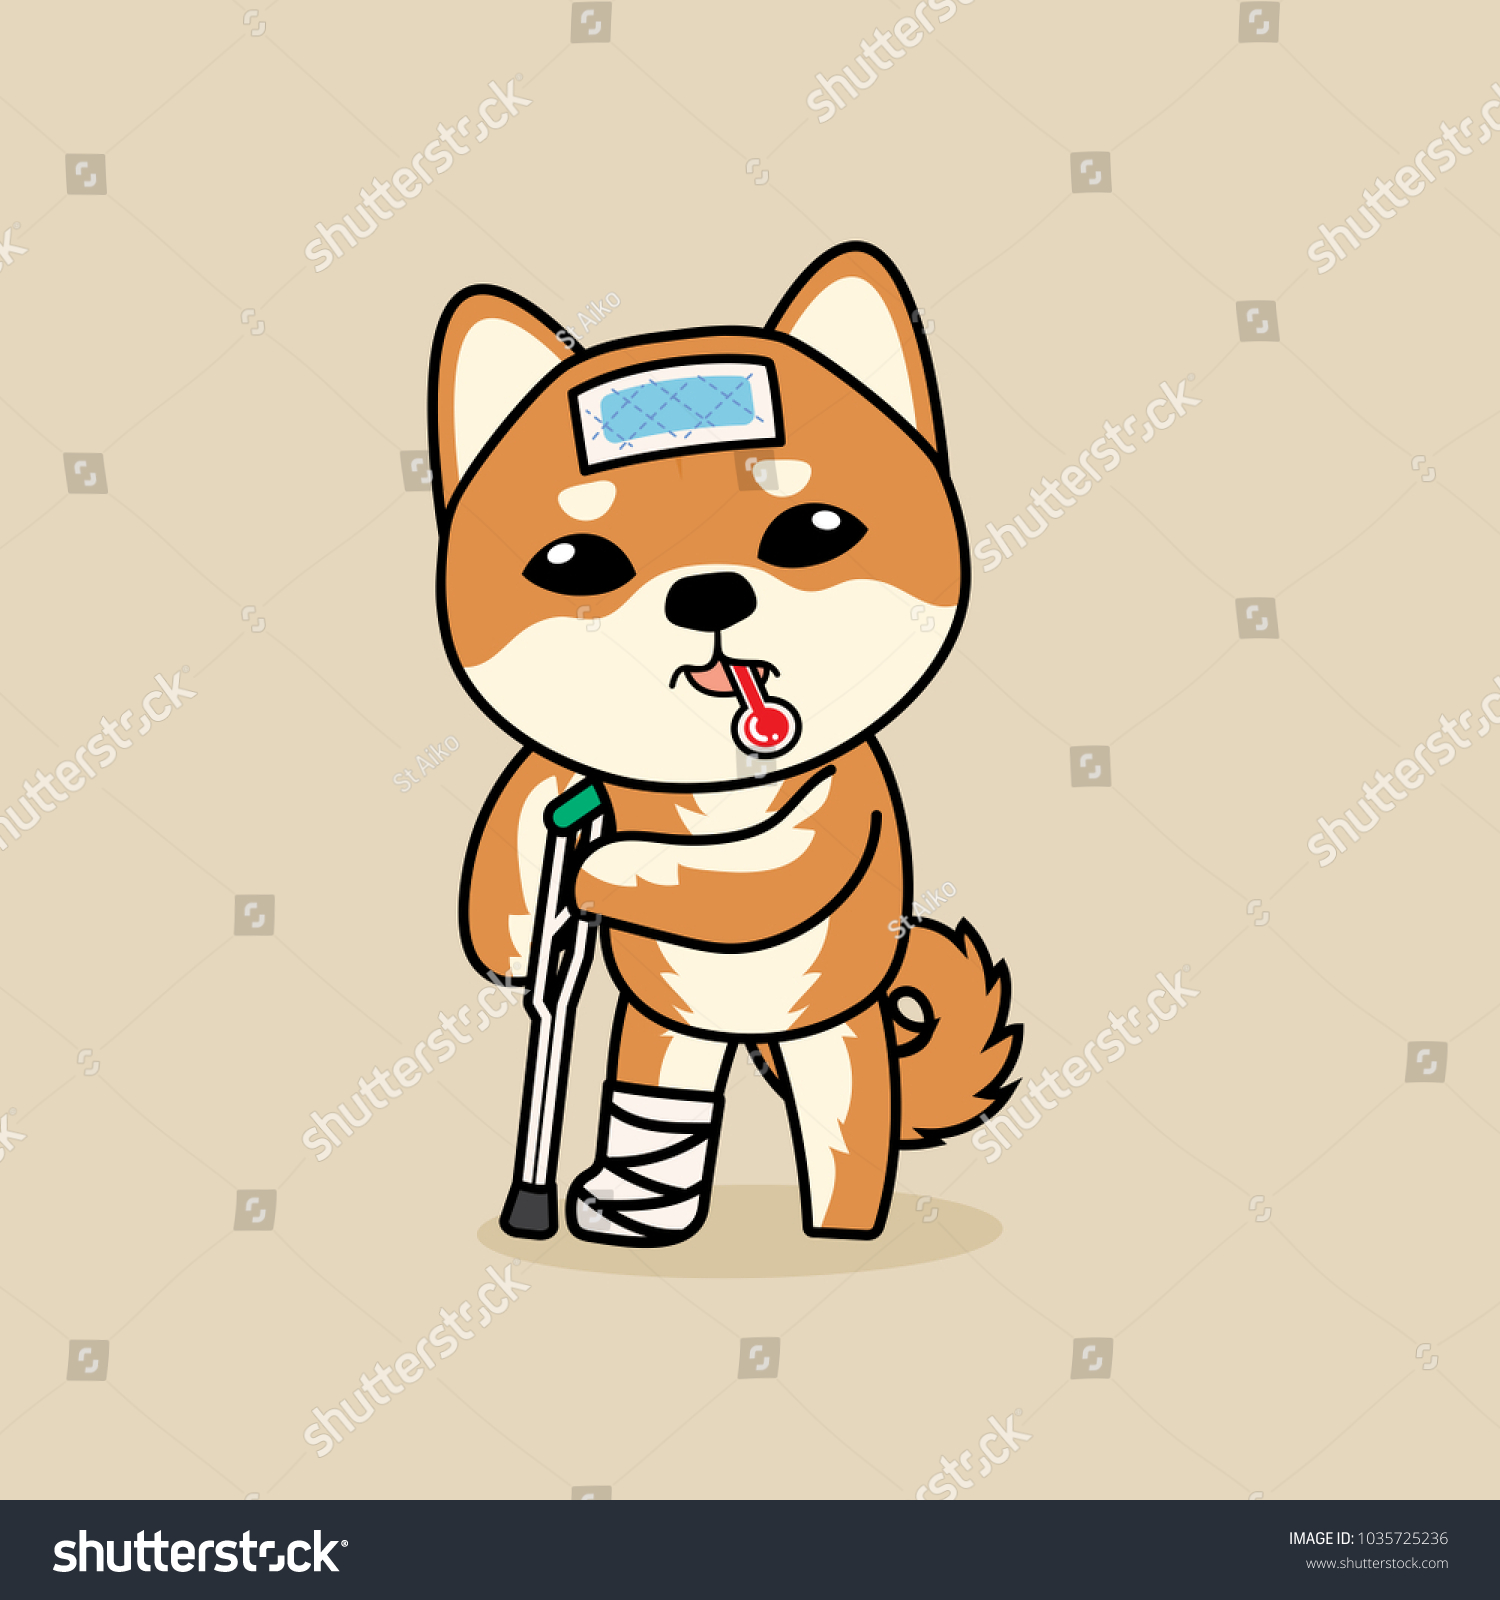 SVG of Cute cartoon character design Shiba Inu dog get sick and broken leg. use cooling fever patch on forehead svg